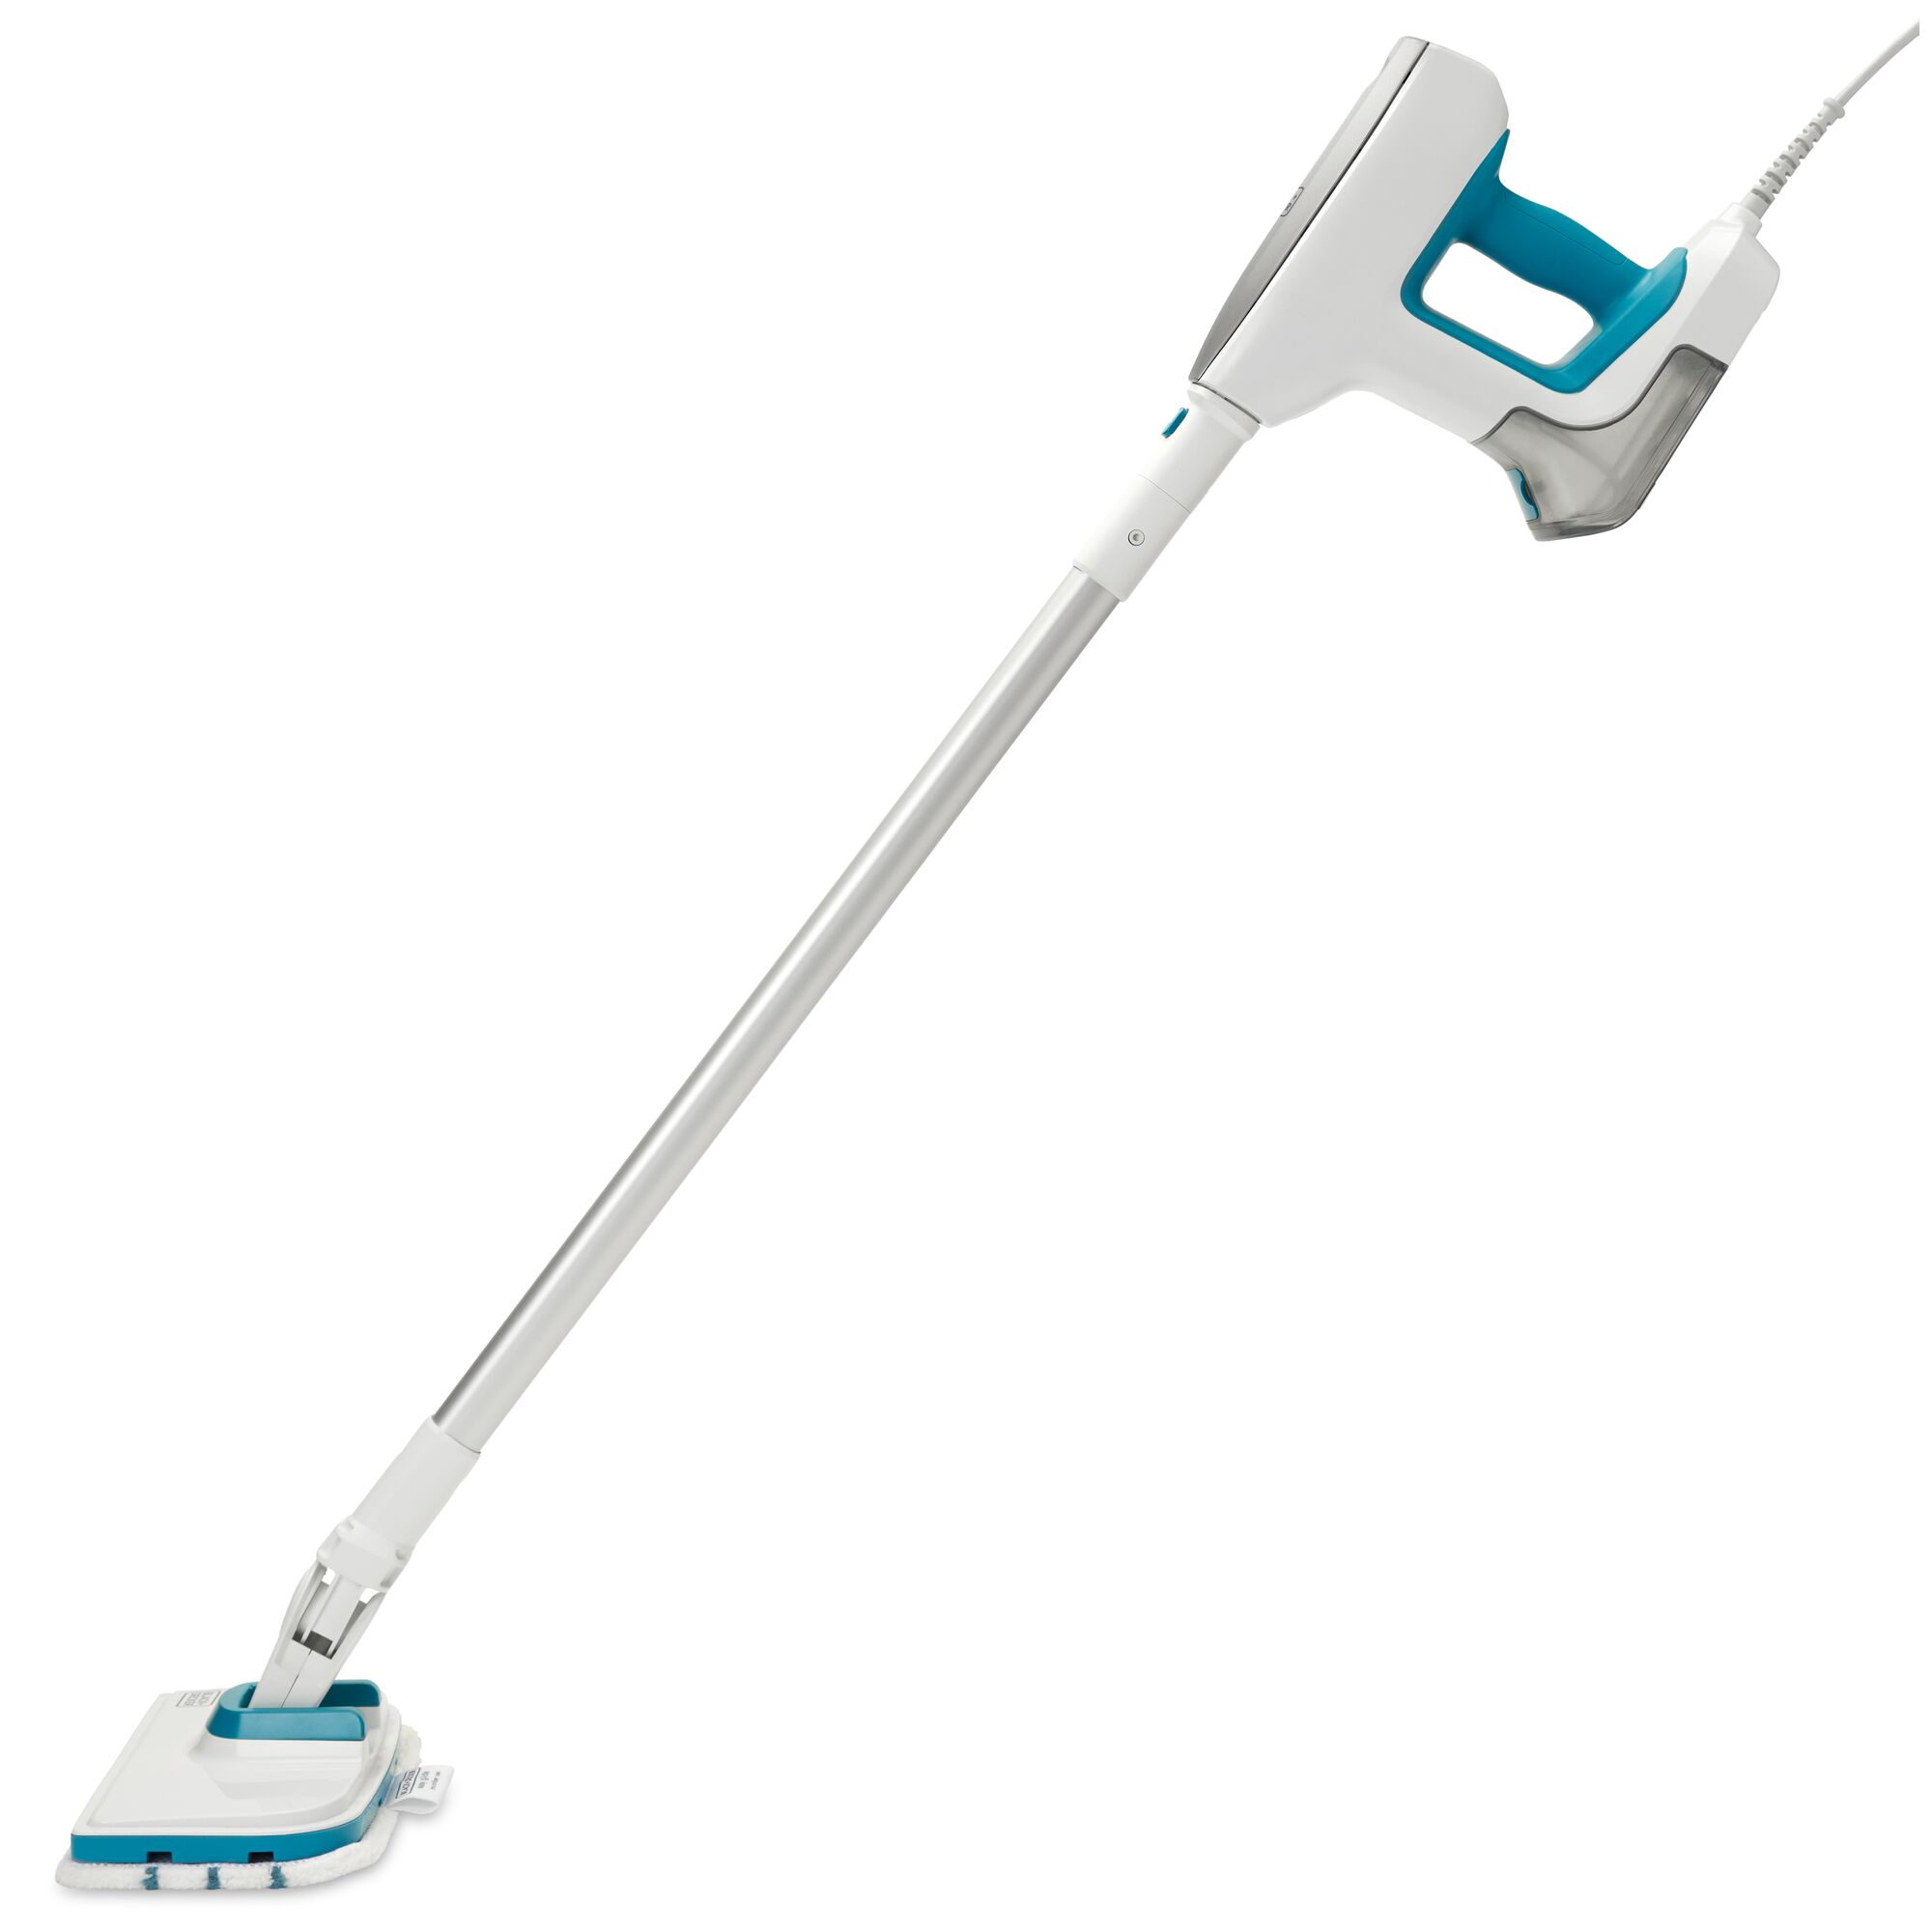 Hero picture of BLACK+DECKER steam mop with mop pointed to the left